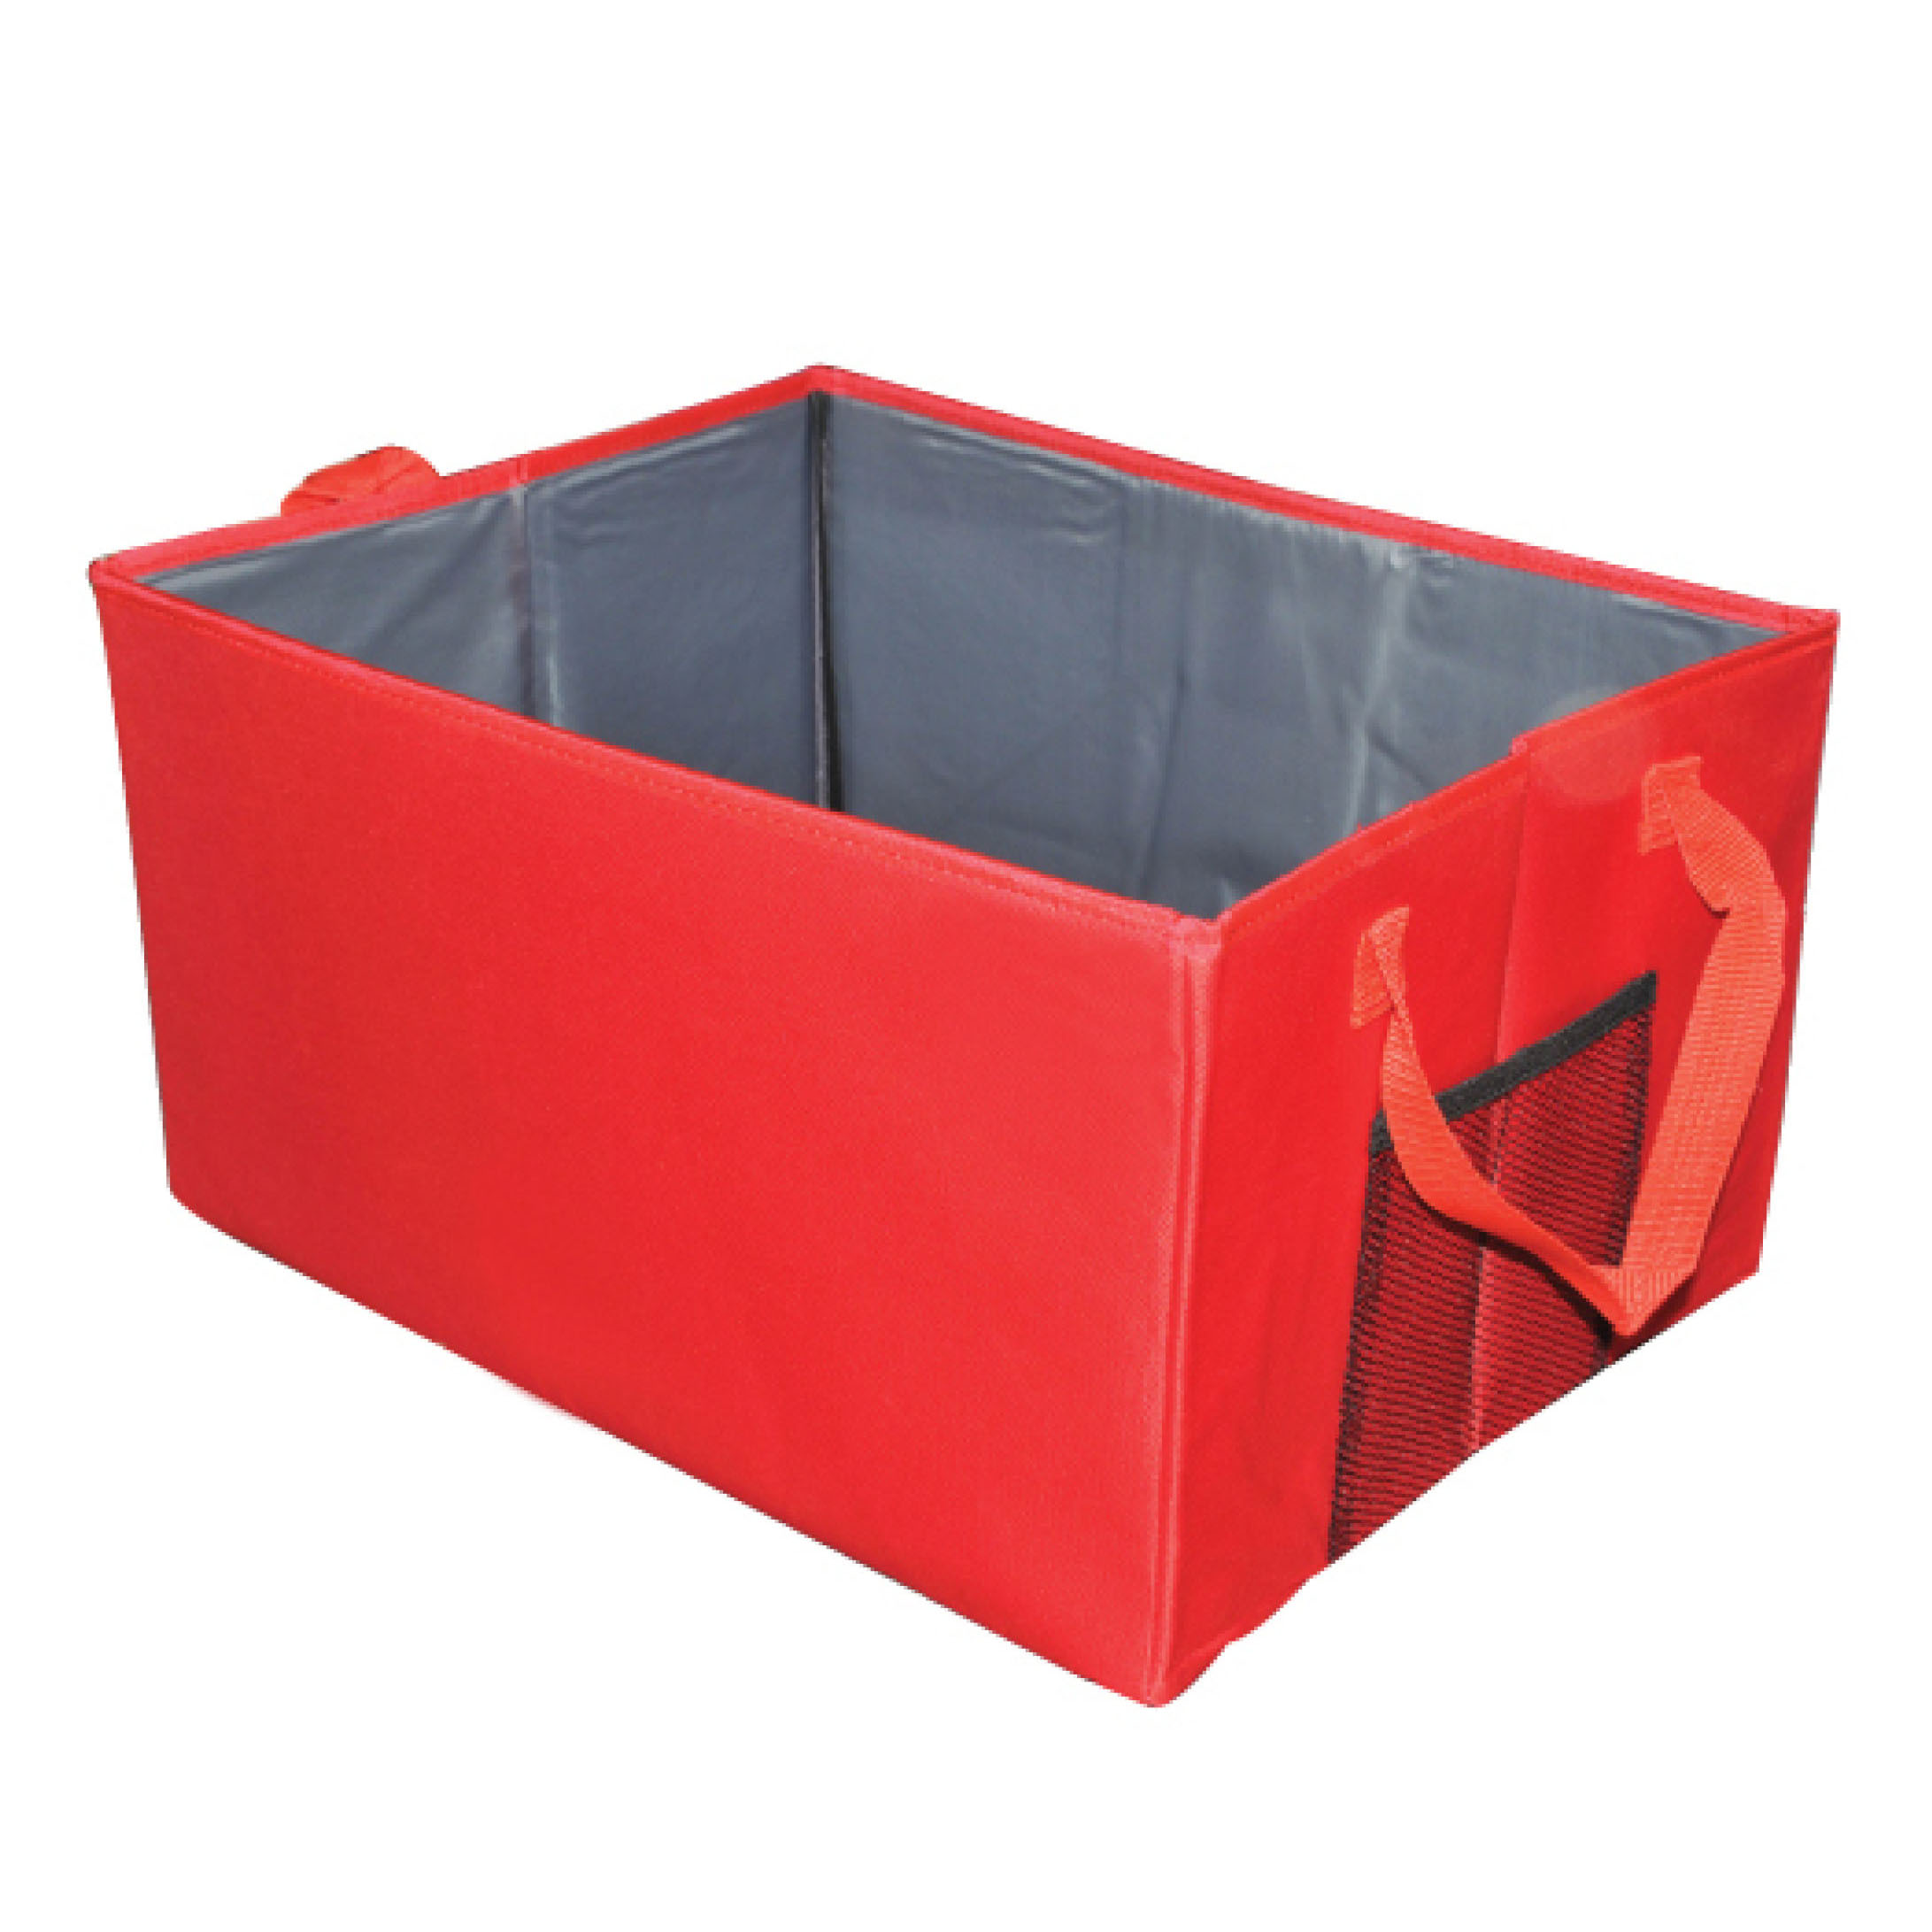 https://giftidea.com.my/wp-content/uploads/2017/02/Red-Carbooth-red.jpg